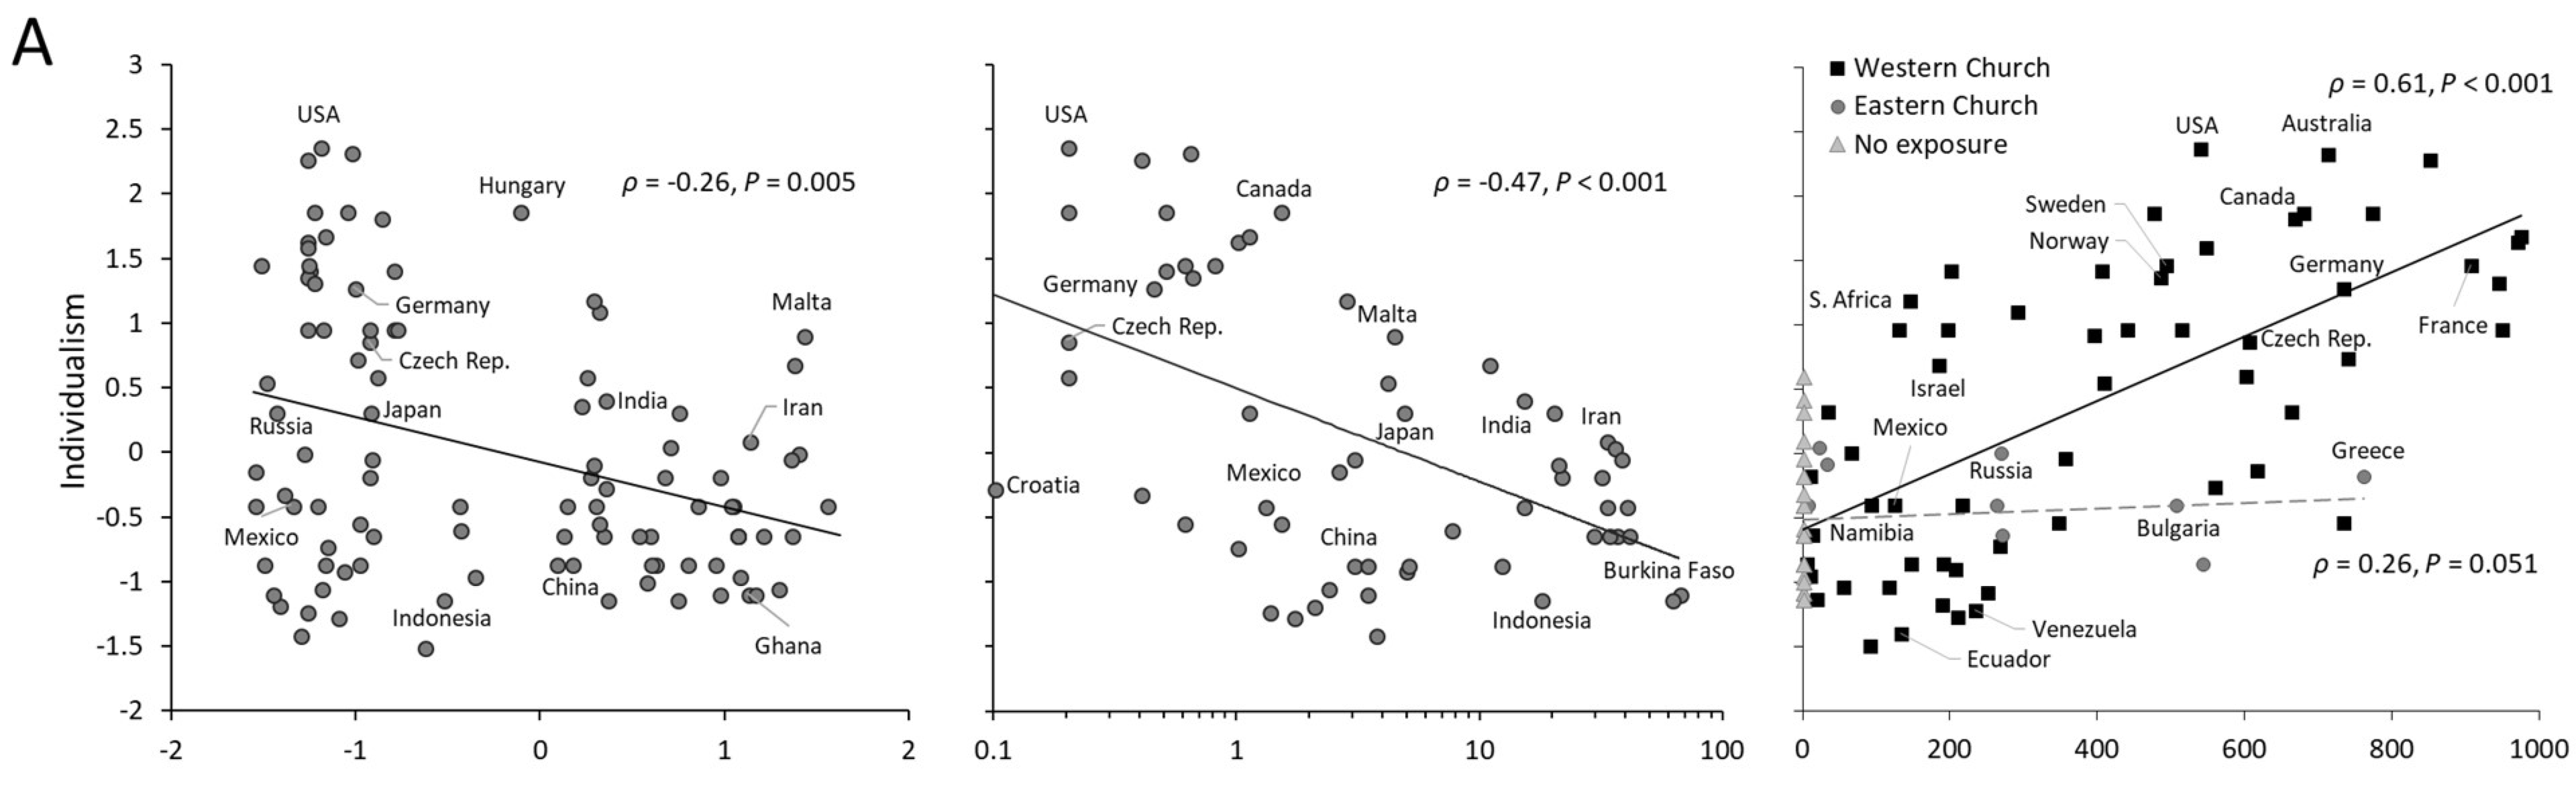 Three graphs showing the correlation of individualism to kinship arrangements and exposure to the Catholic Church